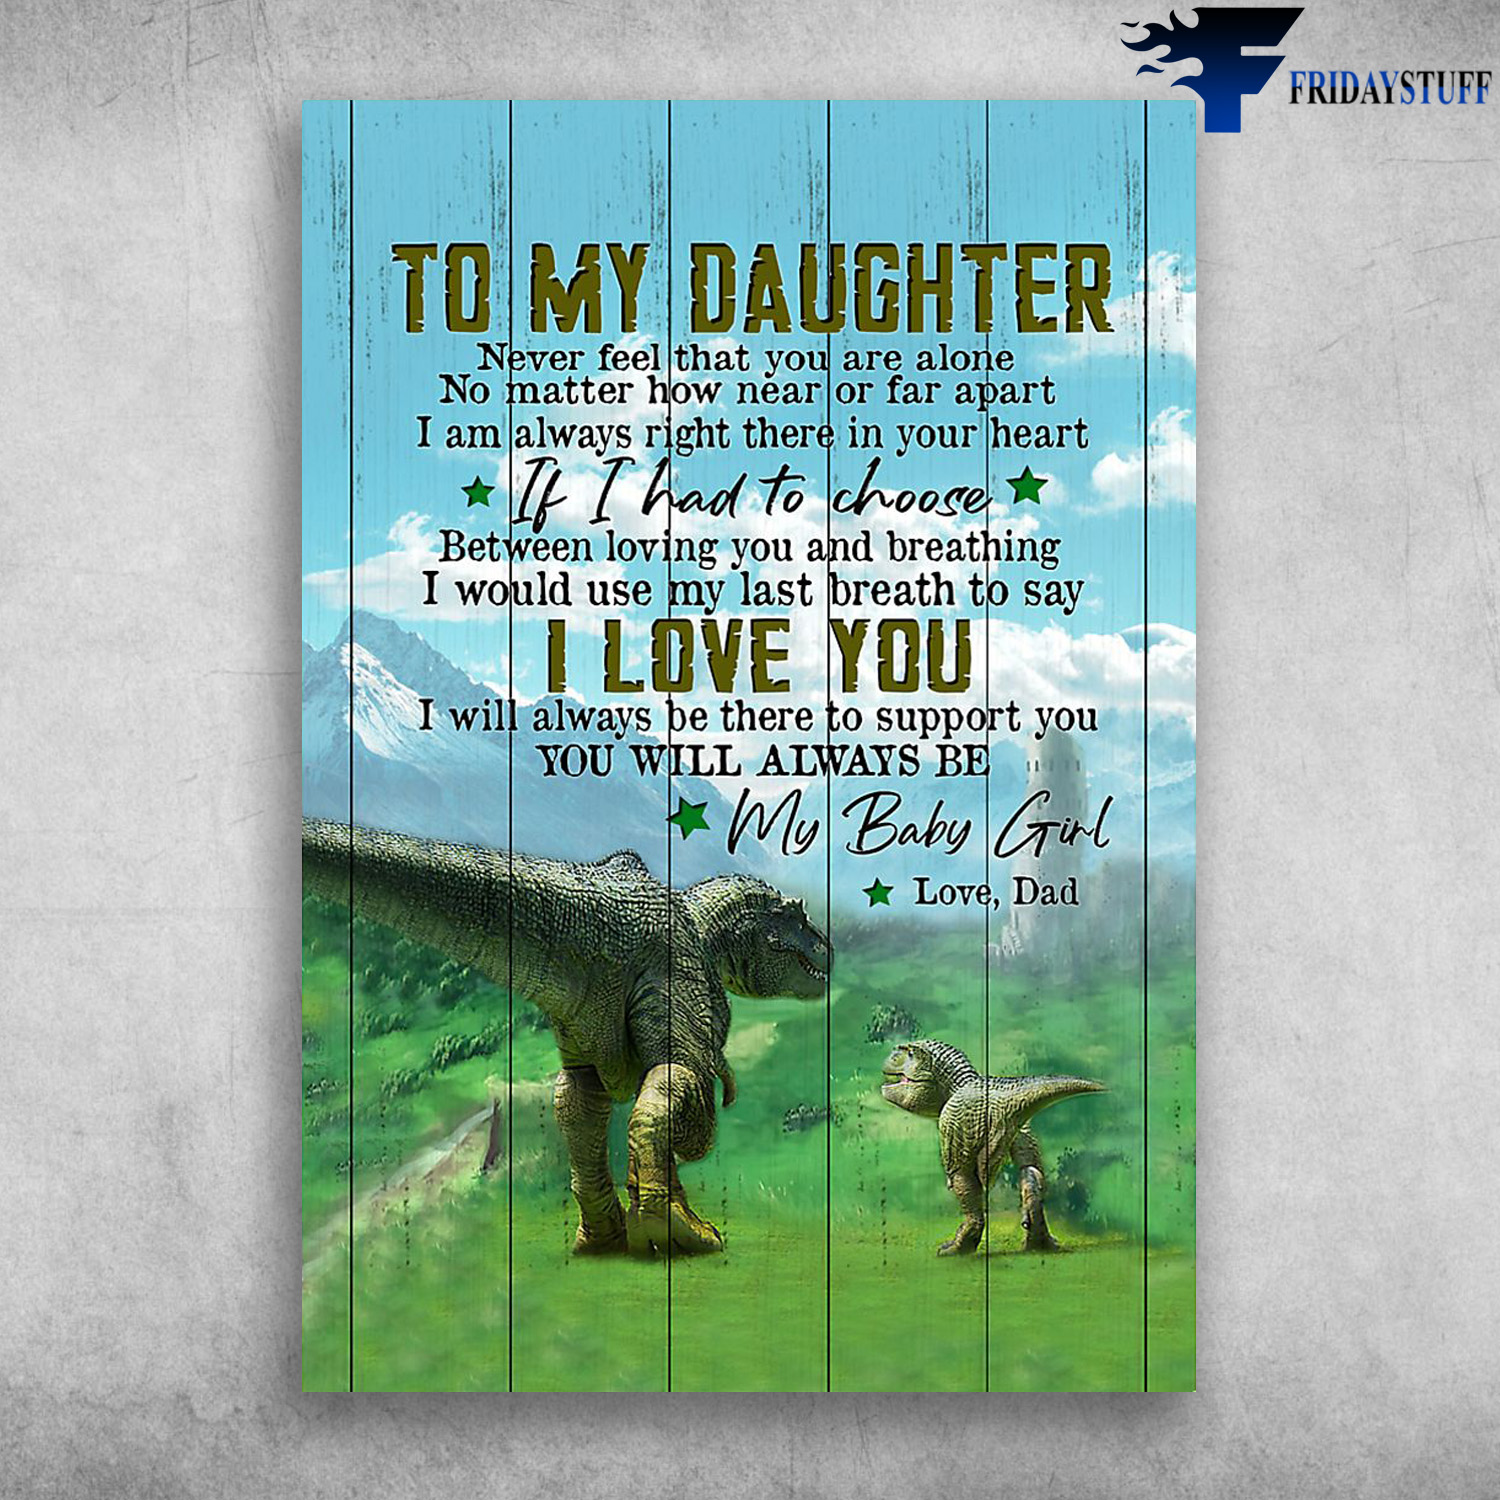 Dad And Daughter Dino - To My Daughter, Never Forget That, You Are Alone, No Matter How Near Of Far Apart, I Am Always Right There In Your Heart, If I Had To Choose, Between Loving You And Breathing, I Would Use My Last Berath To Say